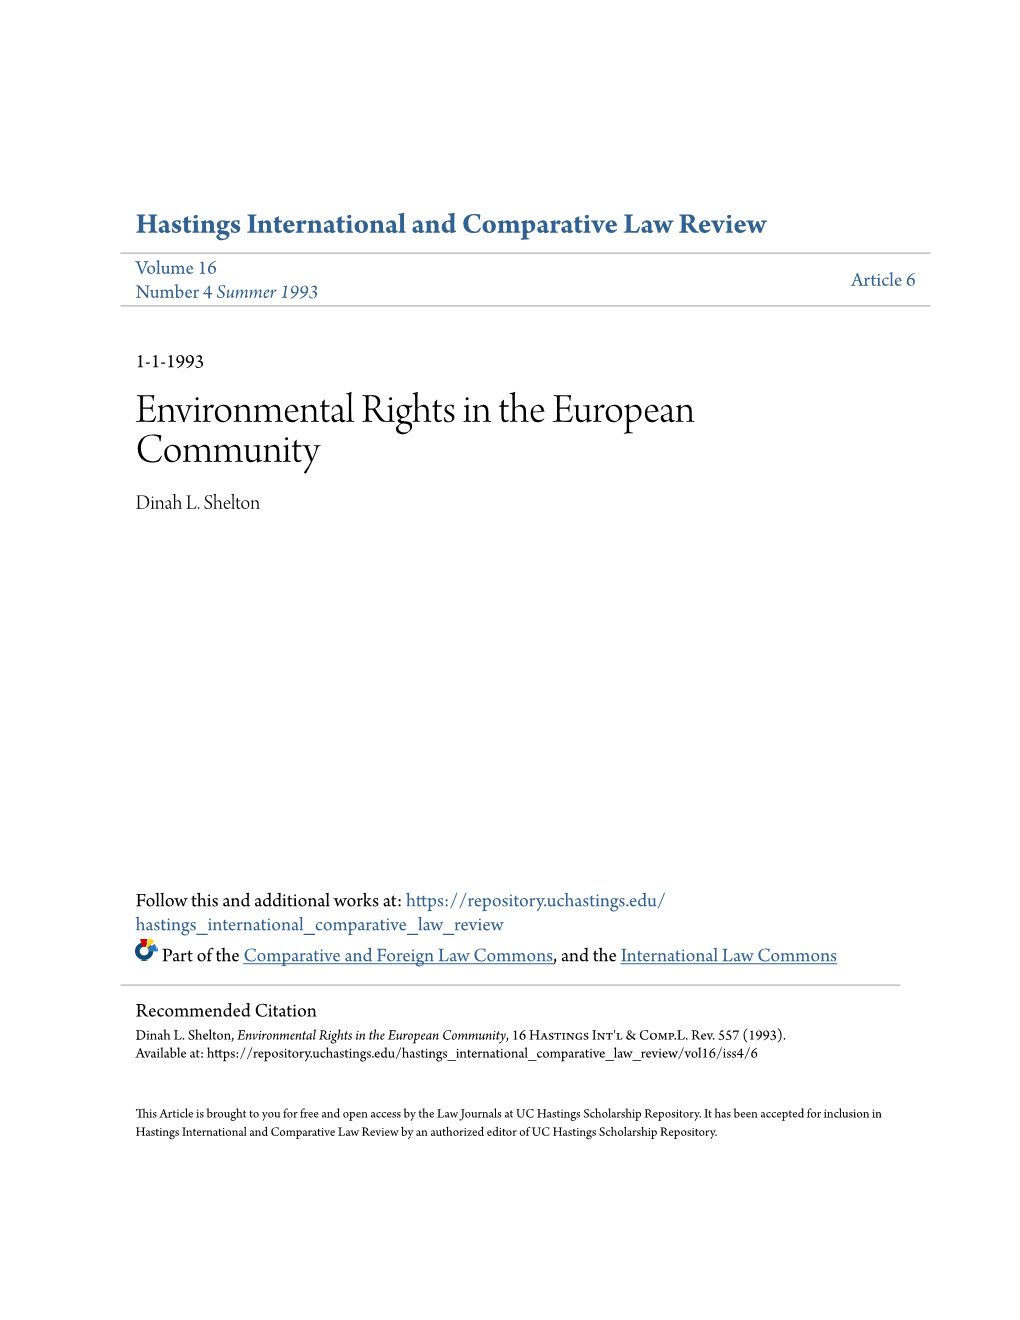 Environmental Rights in the European Community Dinah L